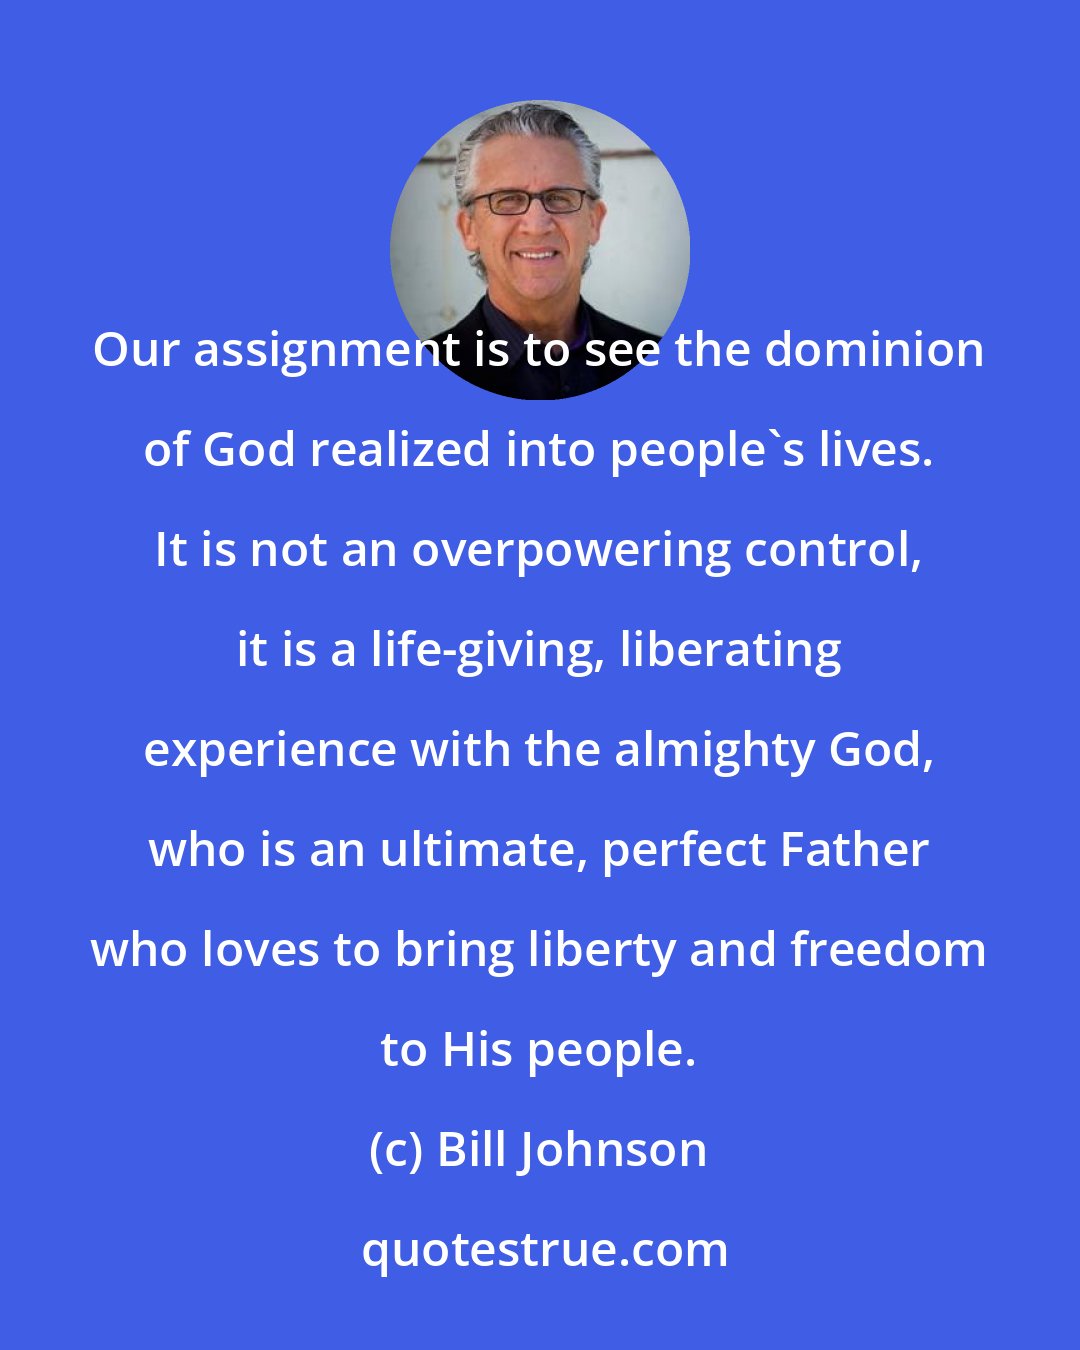 Bill Johnson: Our assignment is to see the dominion of God realized into people's lives. It is not an overpowering control, it is a life-giving, liberating experience with the almighty God, who is an ultimate, perfect Father who loves to bring liberty and freedom to His people.